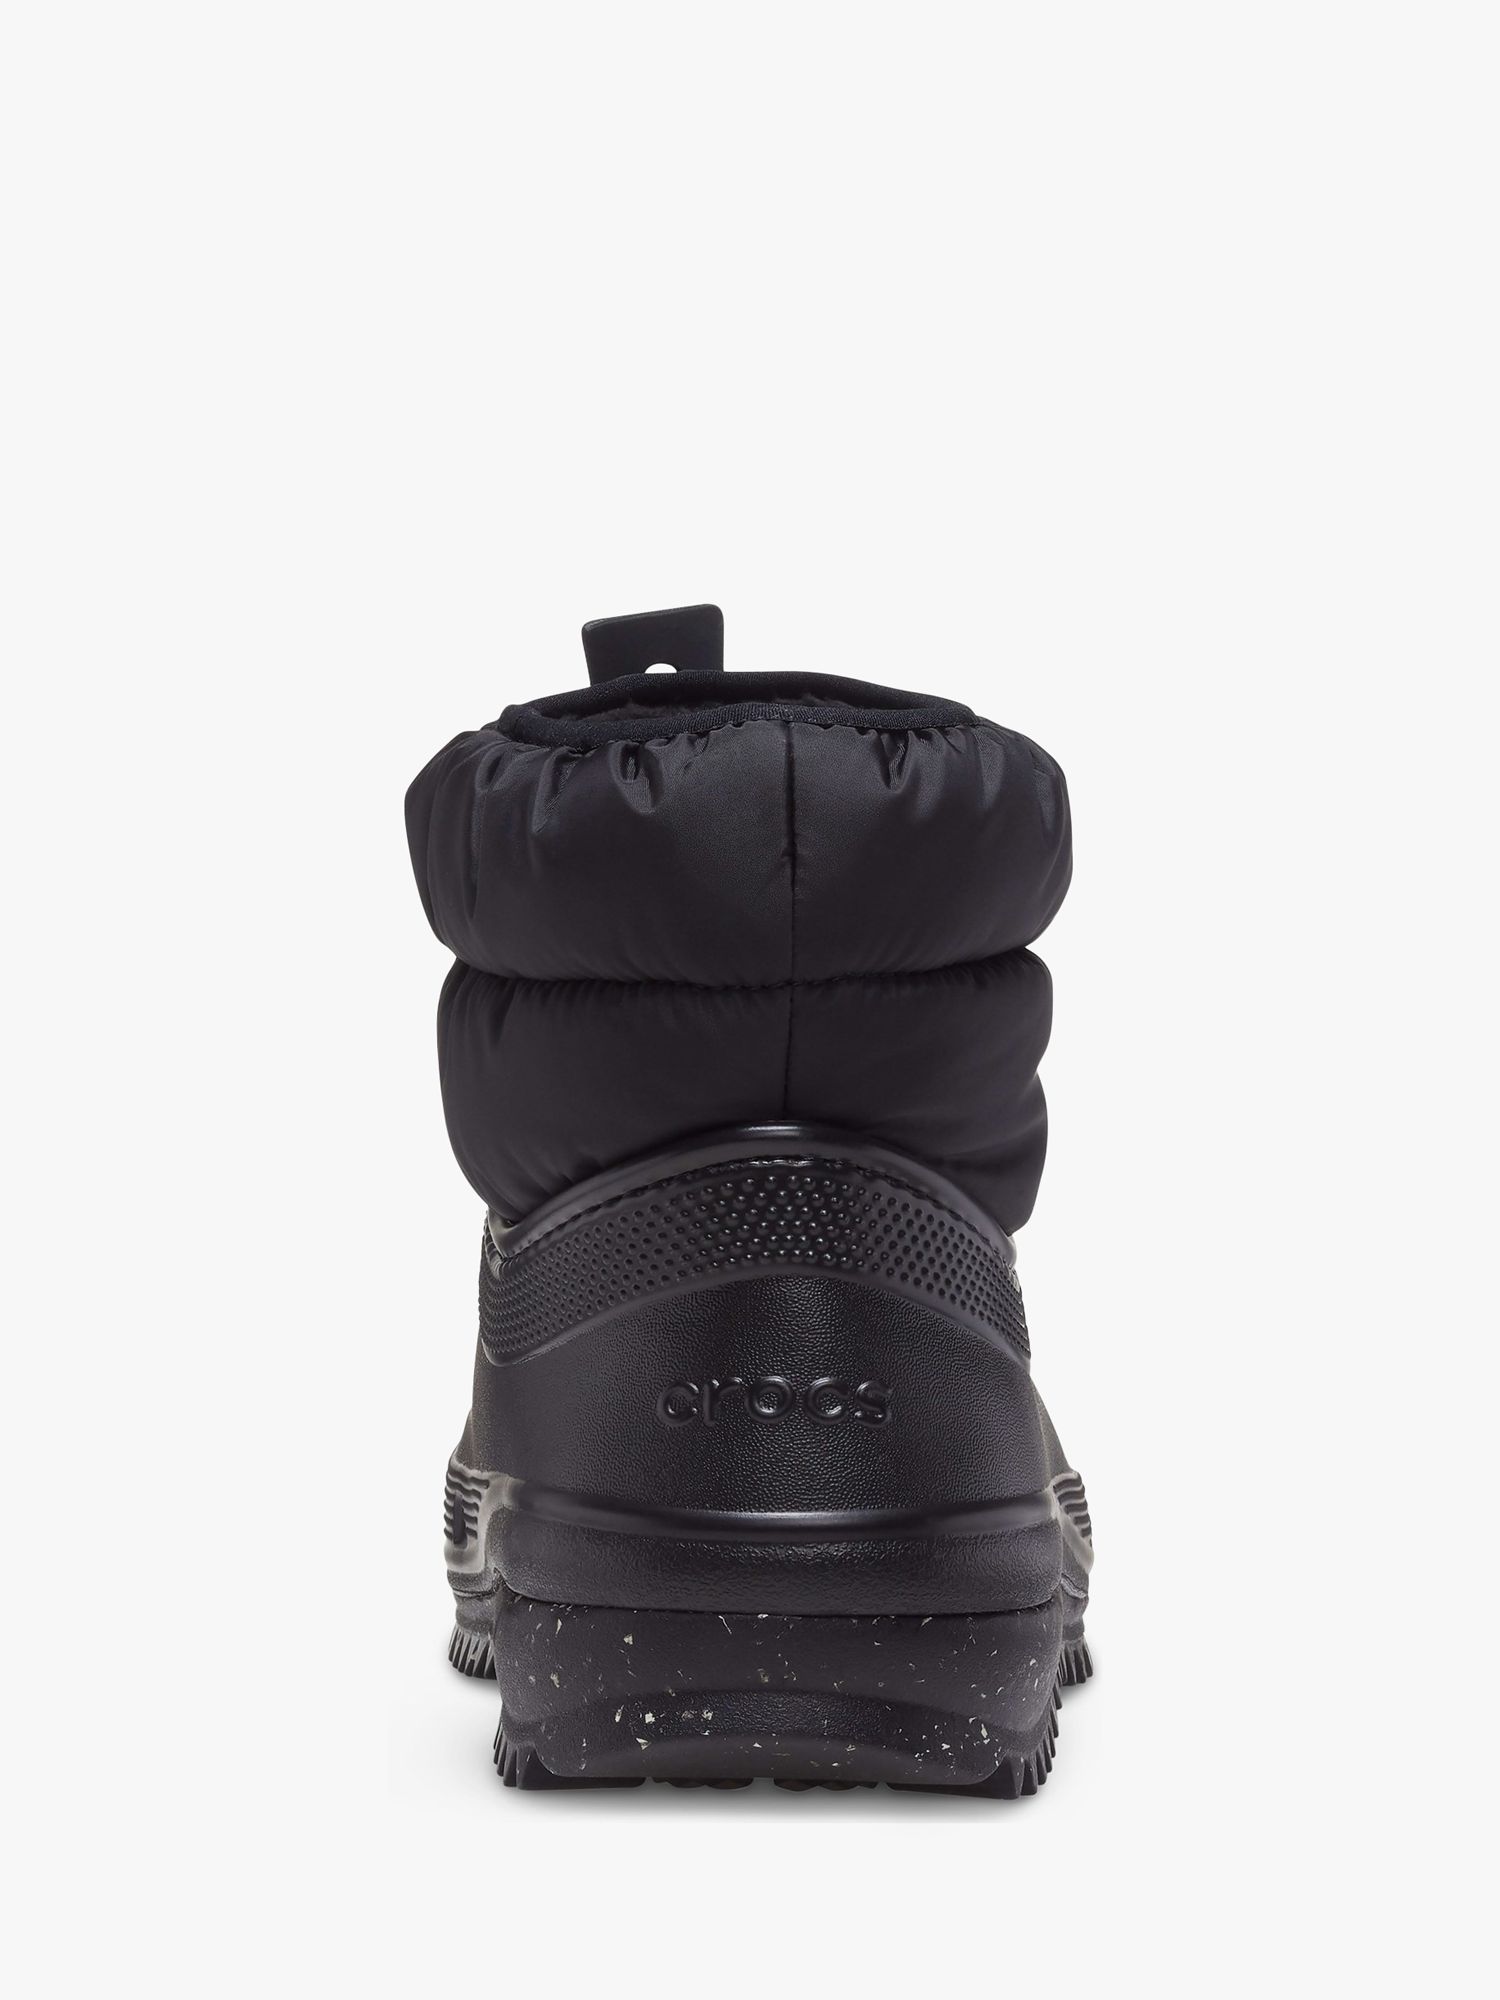 Crocs Classic Neo Puff Short Ankle Boots, Black at John Lewis & Partners